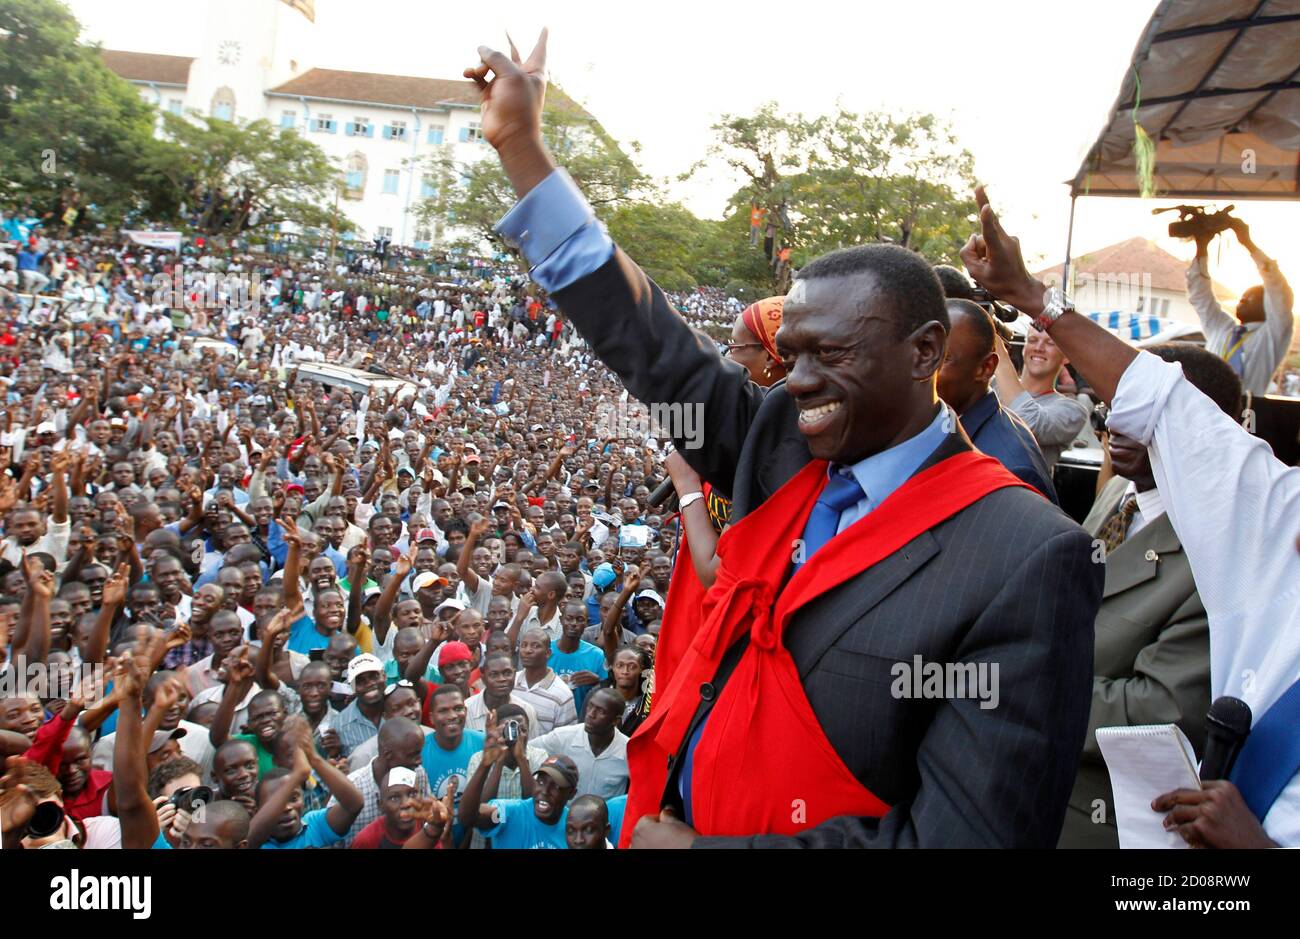 Uganda's main opposition party Inter-Party Cooperation (IPC) presidential candidate Kizza Besigye smiles at his campaign rally at Makerere University Freedom Square in the capital Kampala February 16, 2011. Security tightened in Kampala on Wednesday as voters in carnival-like mood descended on the final rallies of Uganda's two main presidential contenders.   REUTERS/Thomas Mukoya (UGANDA - Tags: POLITICS ELECTIONS) Stock Photo